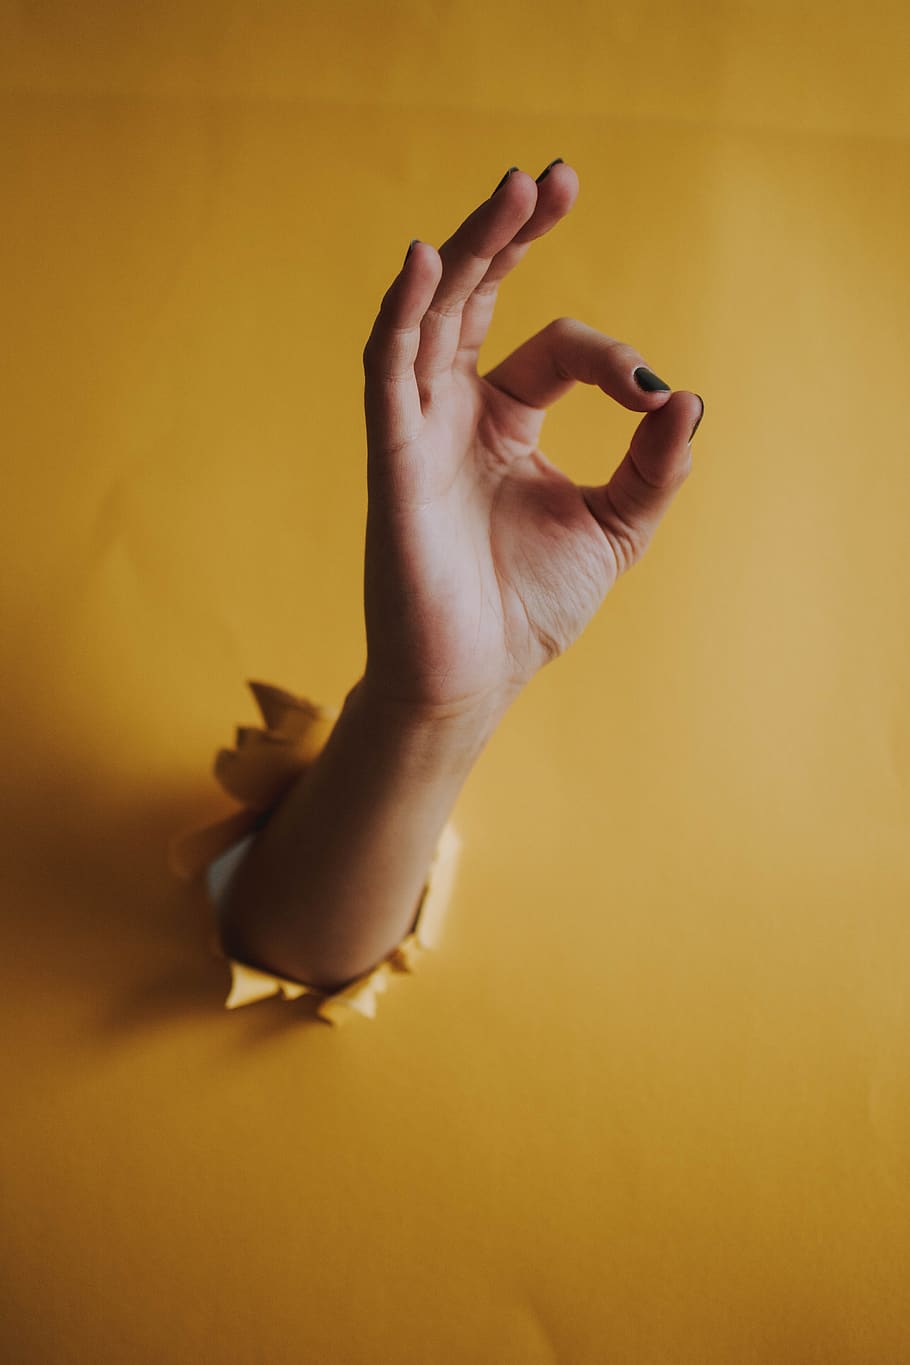 hand, yellow, hole, ok, characters, symbol, human hand, human body part, one person, indoors